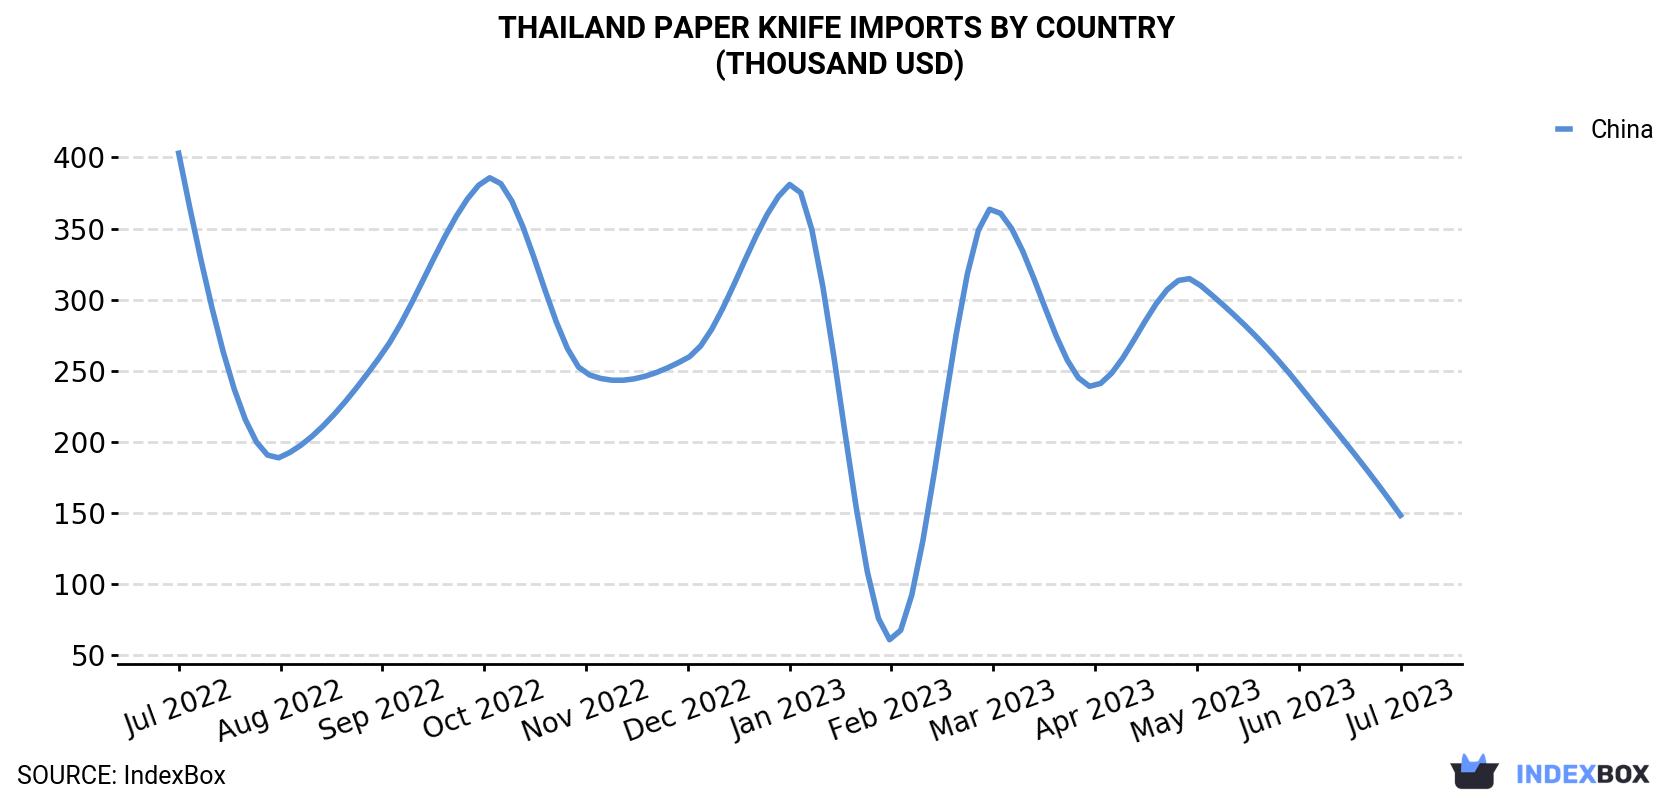 Thailand Paper Knife Imports By Country (Thousand USD)